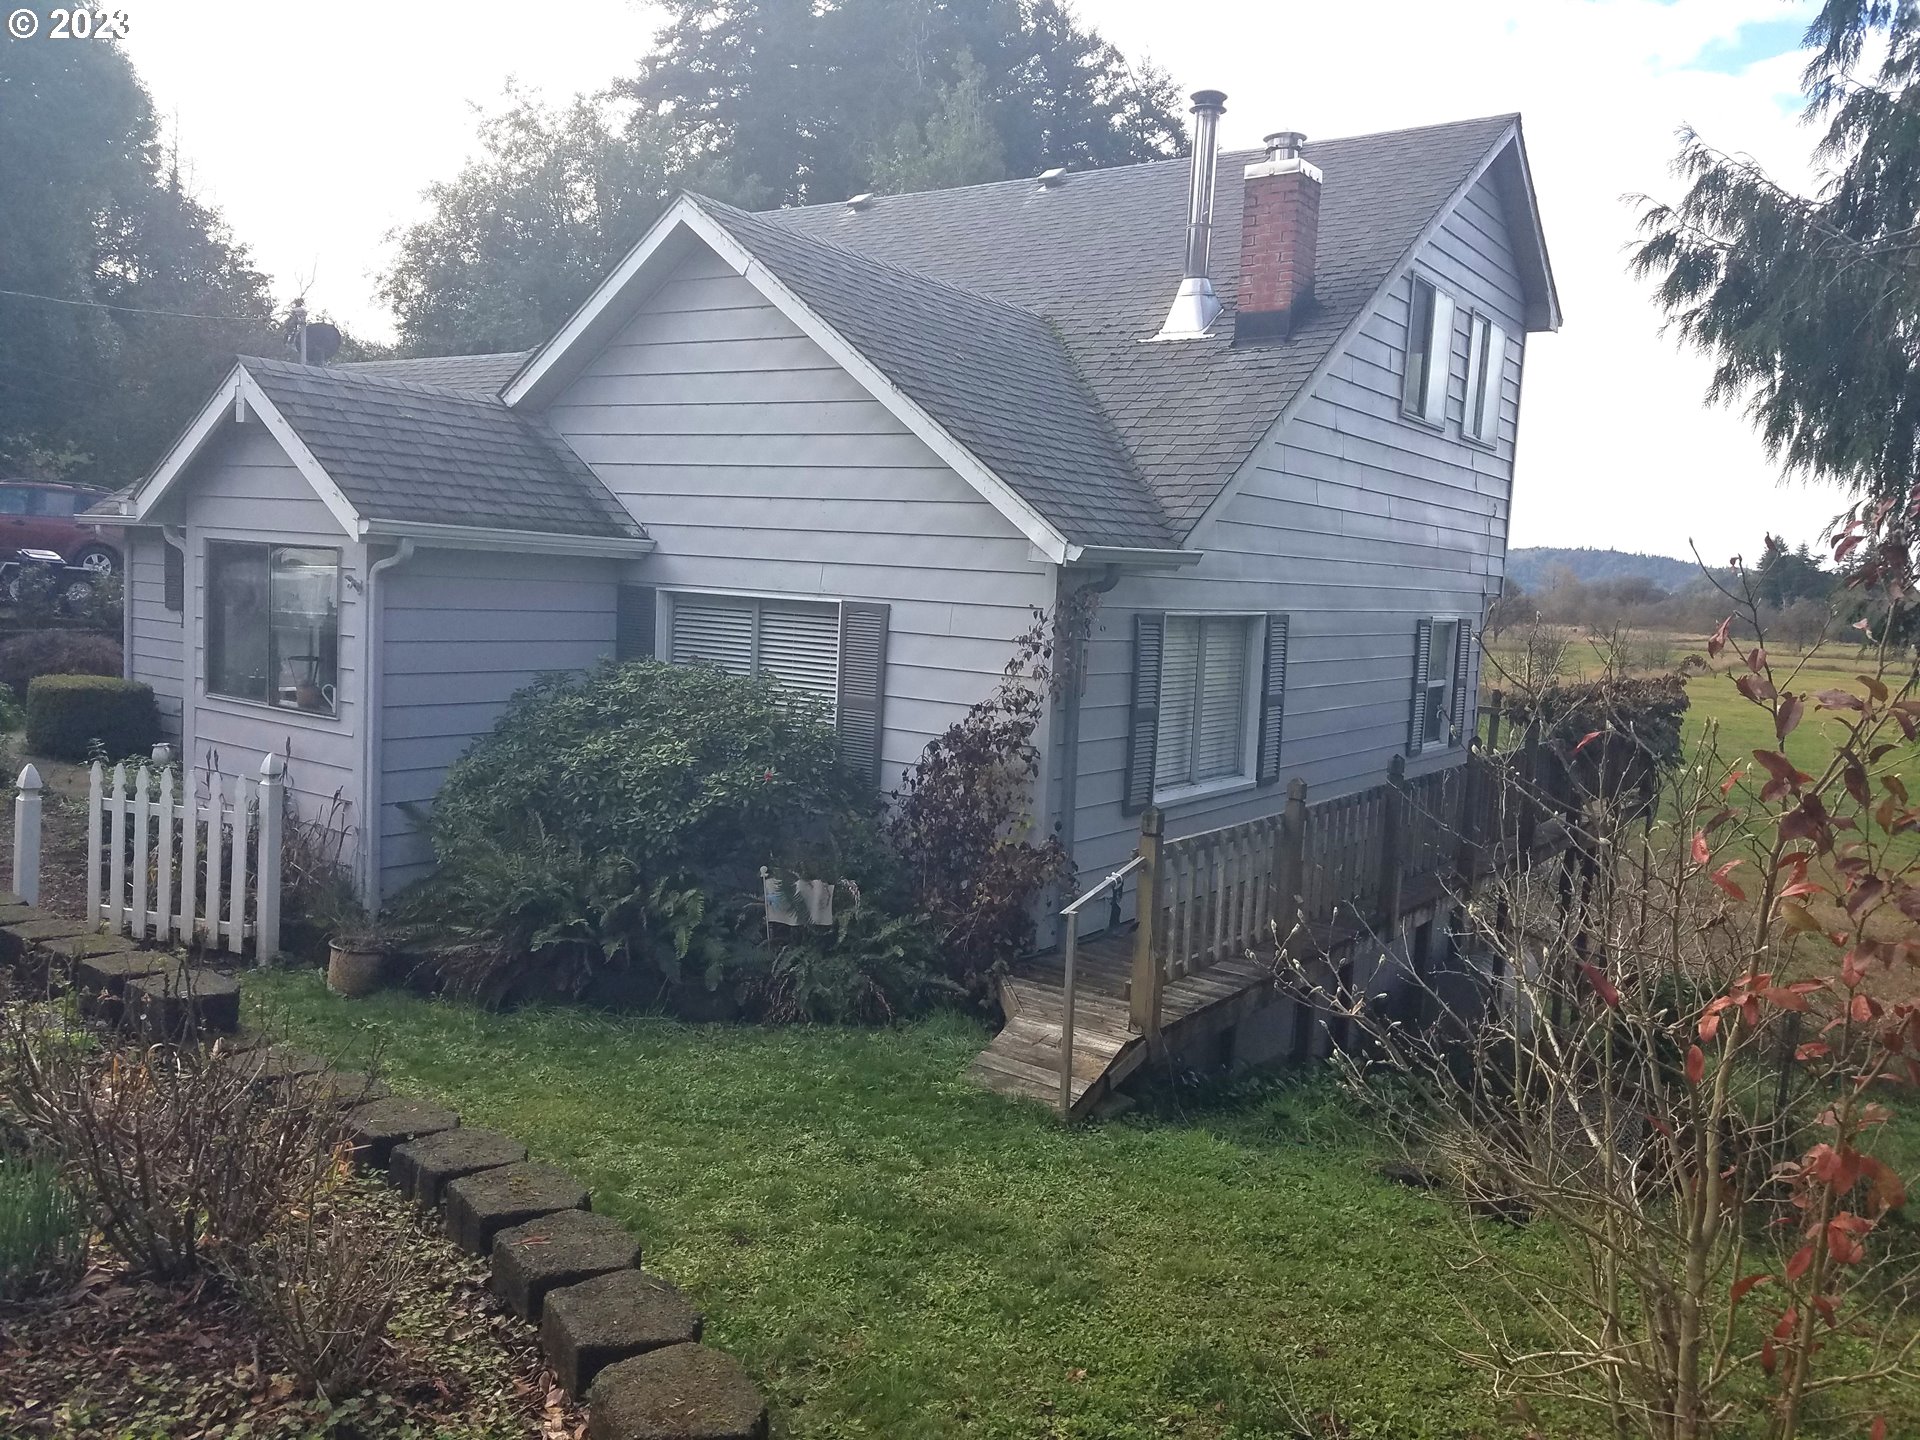 877 N BIRCH ST, Coquille, OR 